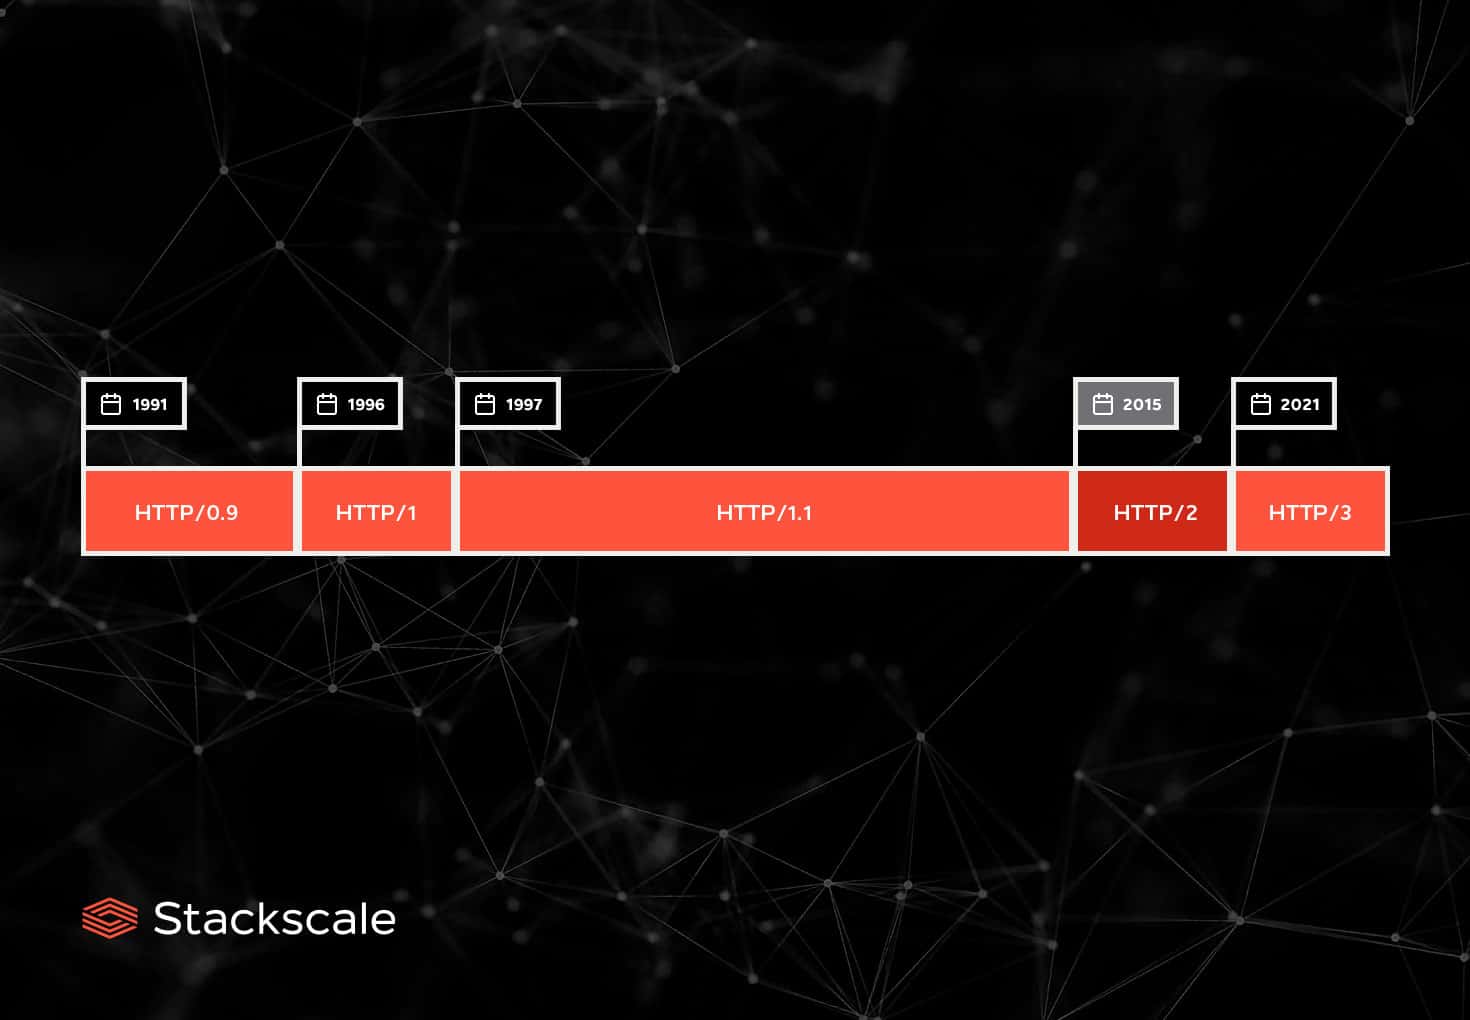 HTTP protocol timeline from HTTP/0.9 to HTTP/2 and HTTP/3